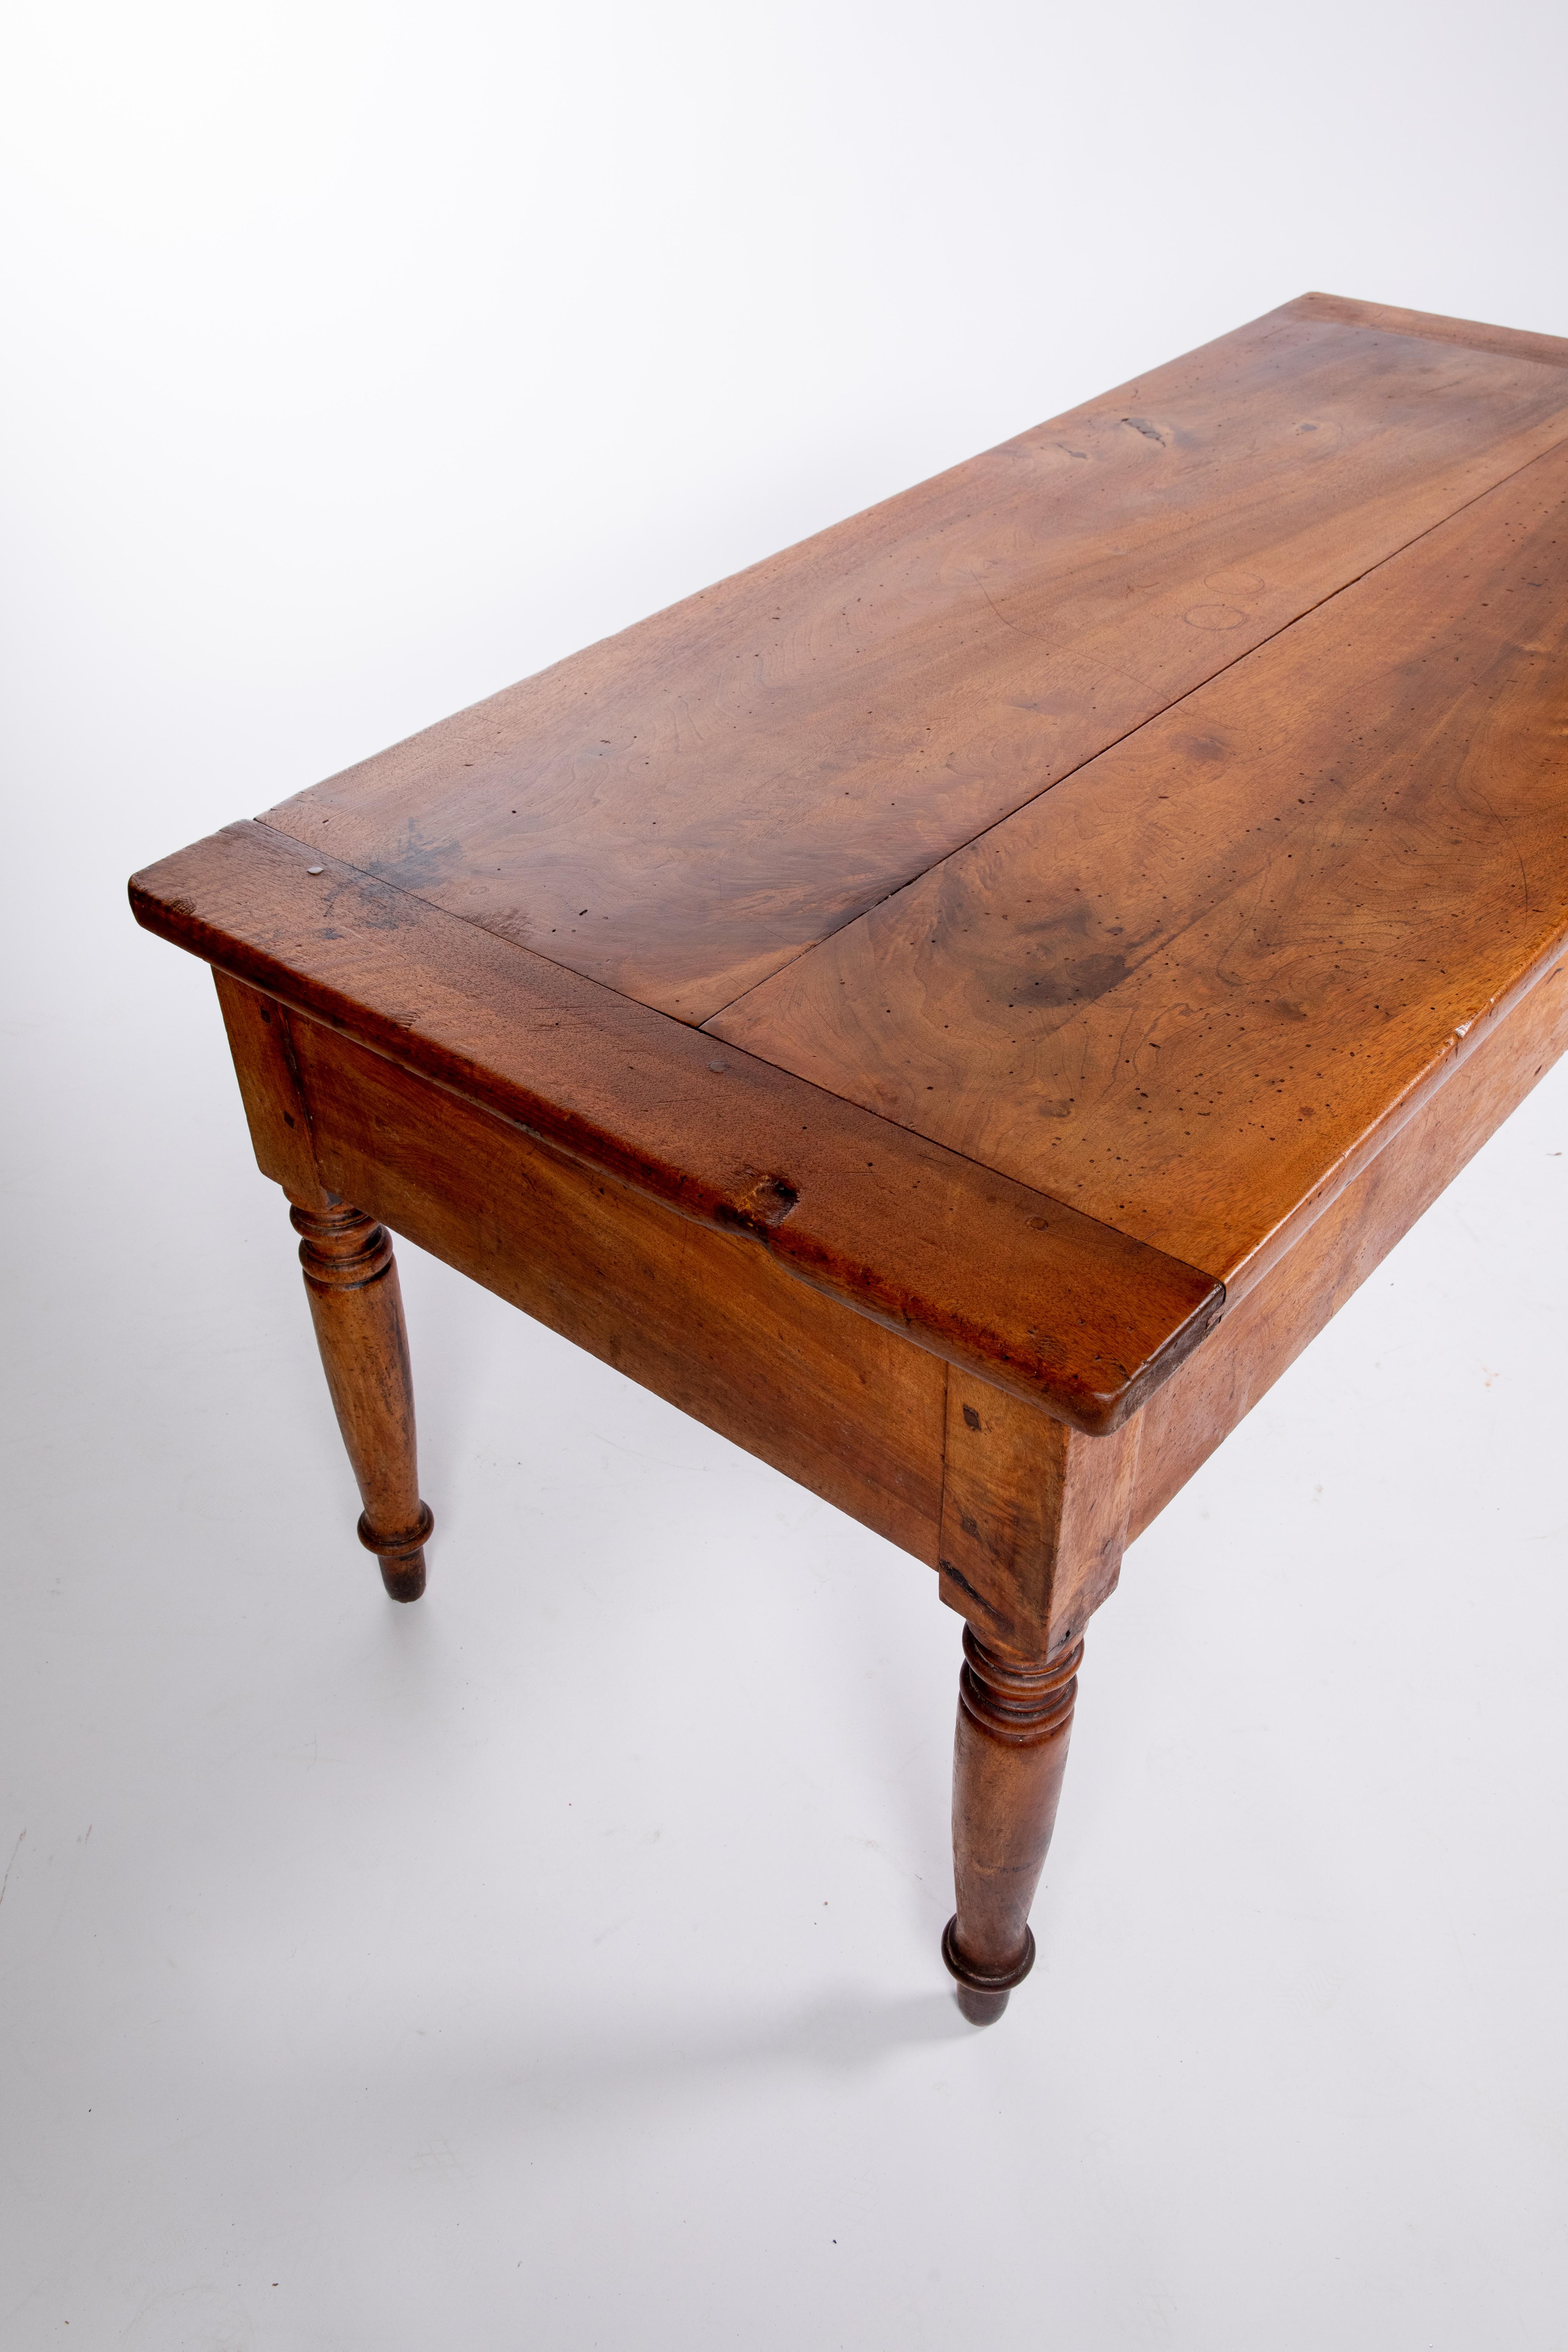 Hand-Crafted French Provincial Work Table